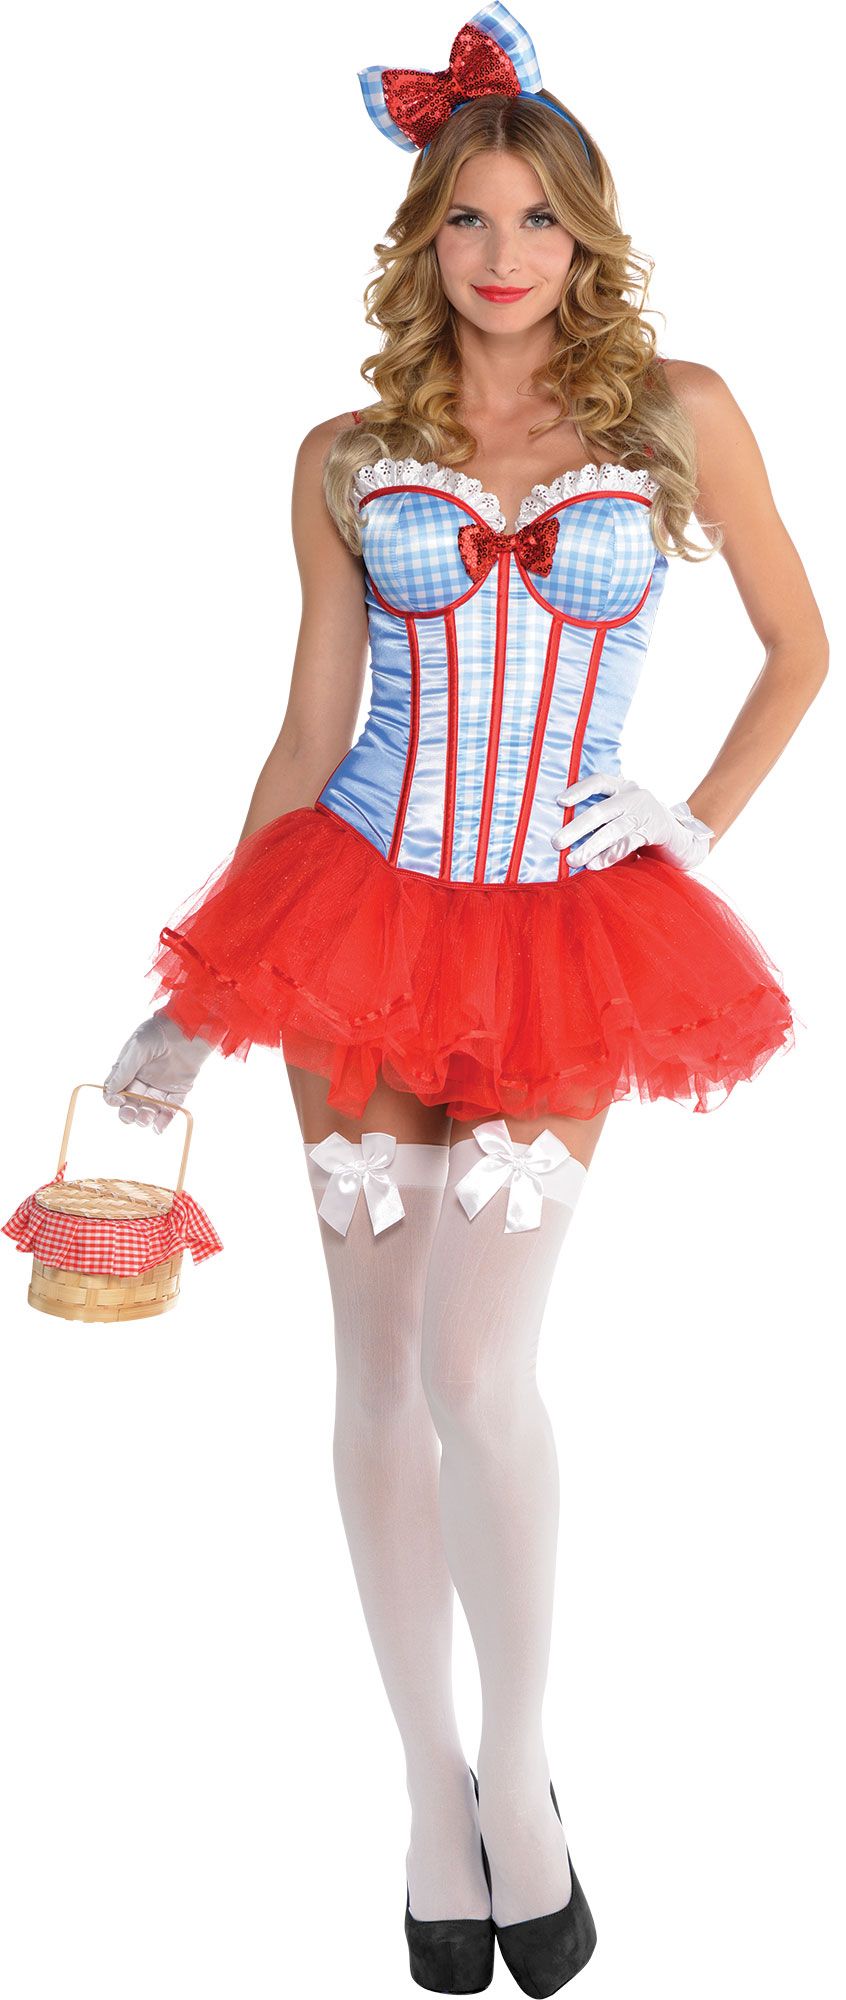 Create Your Own Womens Kansas Cutie Costume Accessories Party City 0744